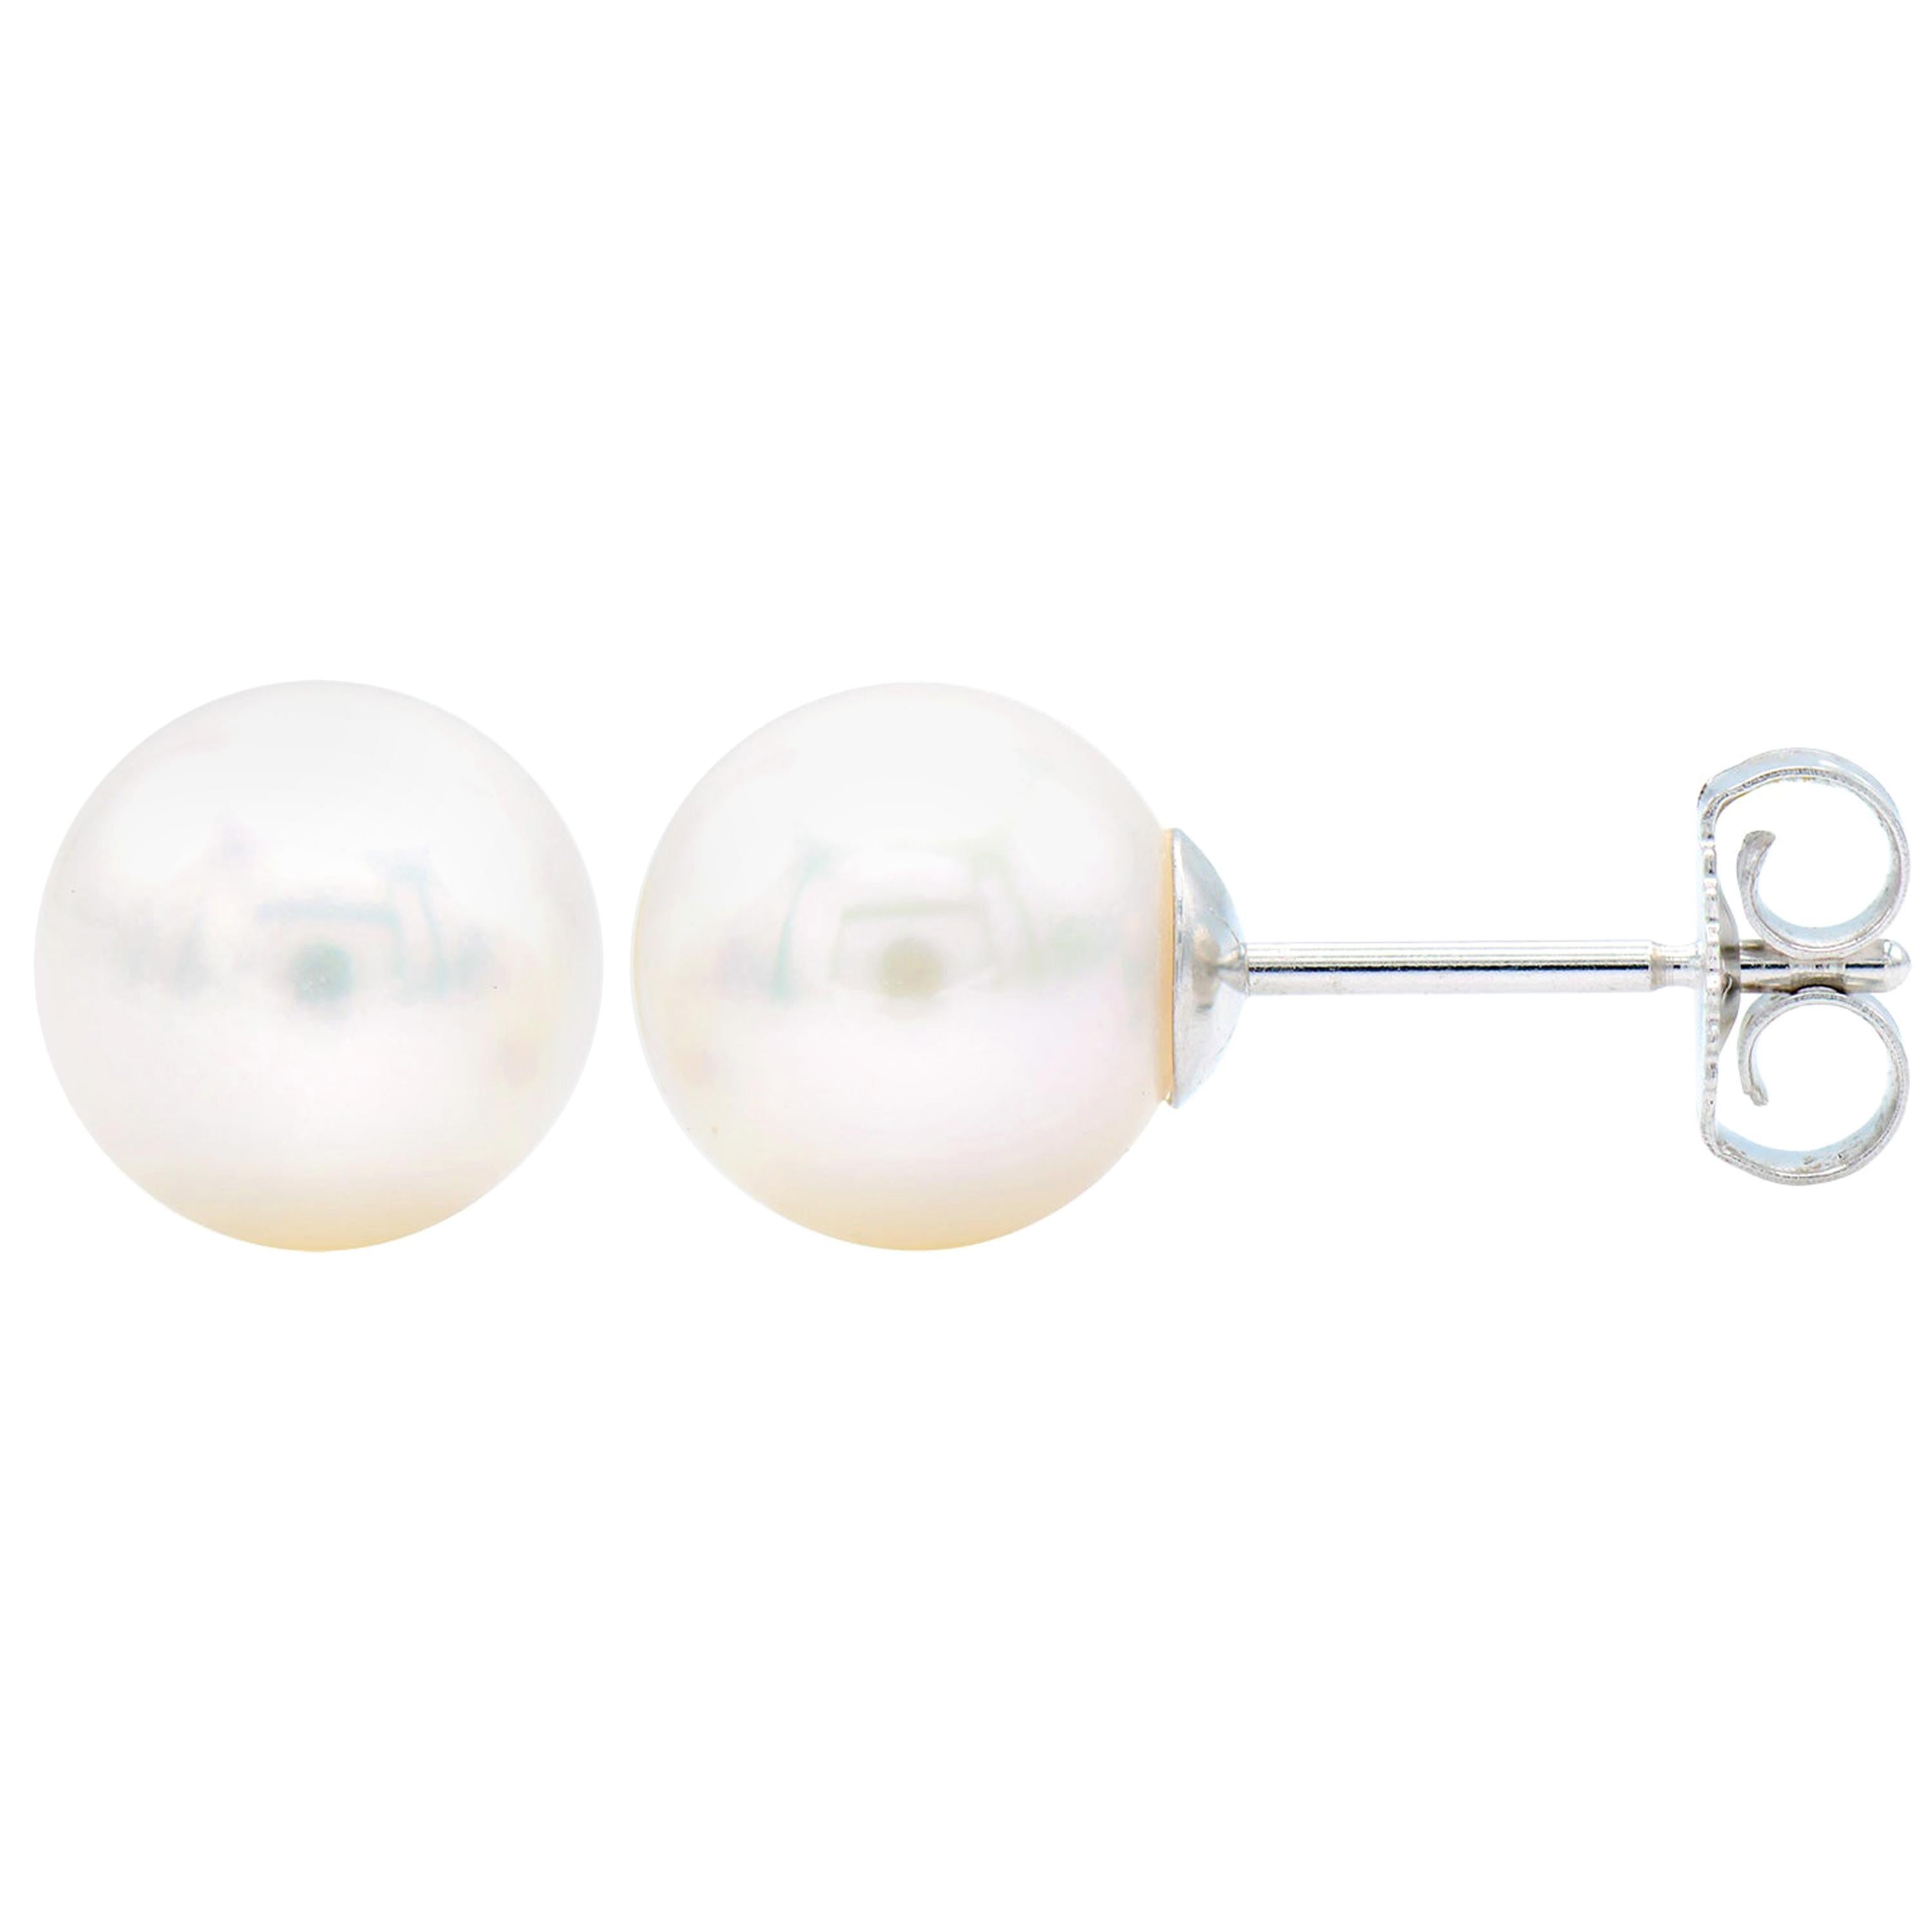 7-7.5mm Cultured Pearl Stud Earrings with 14 Karat White Gold Posts and Backs